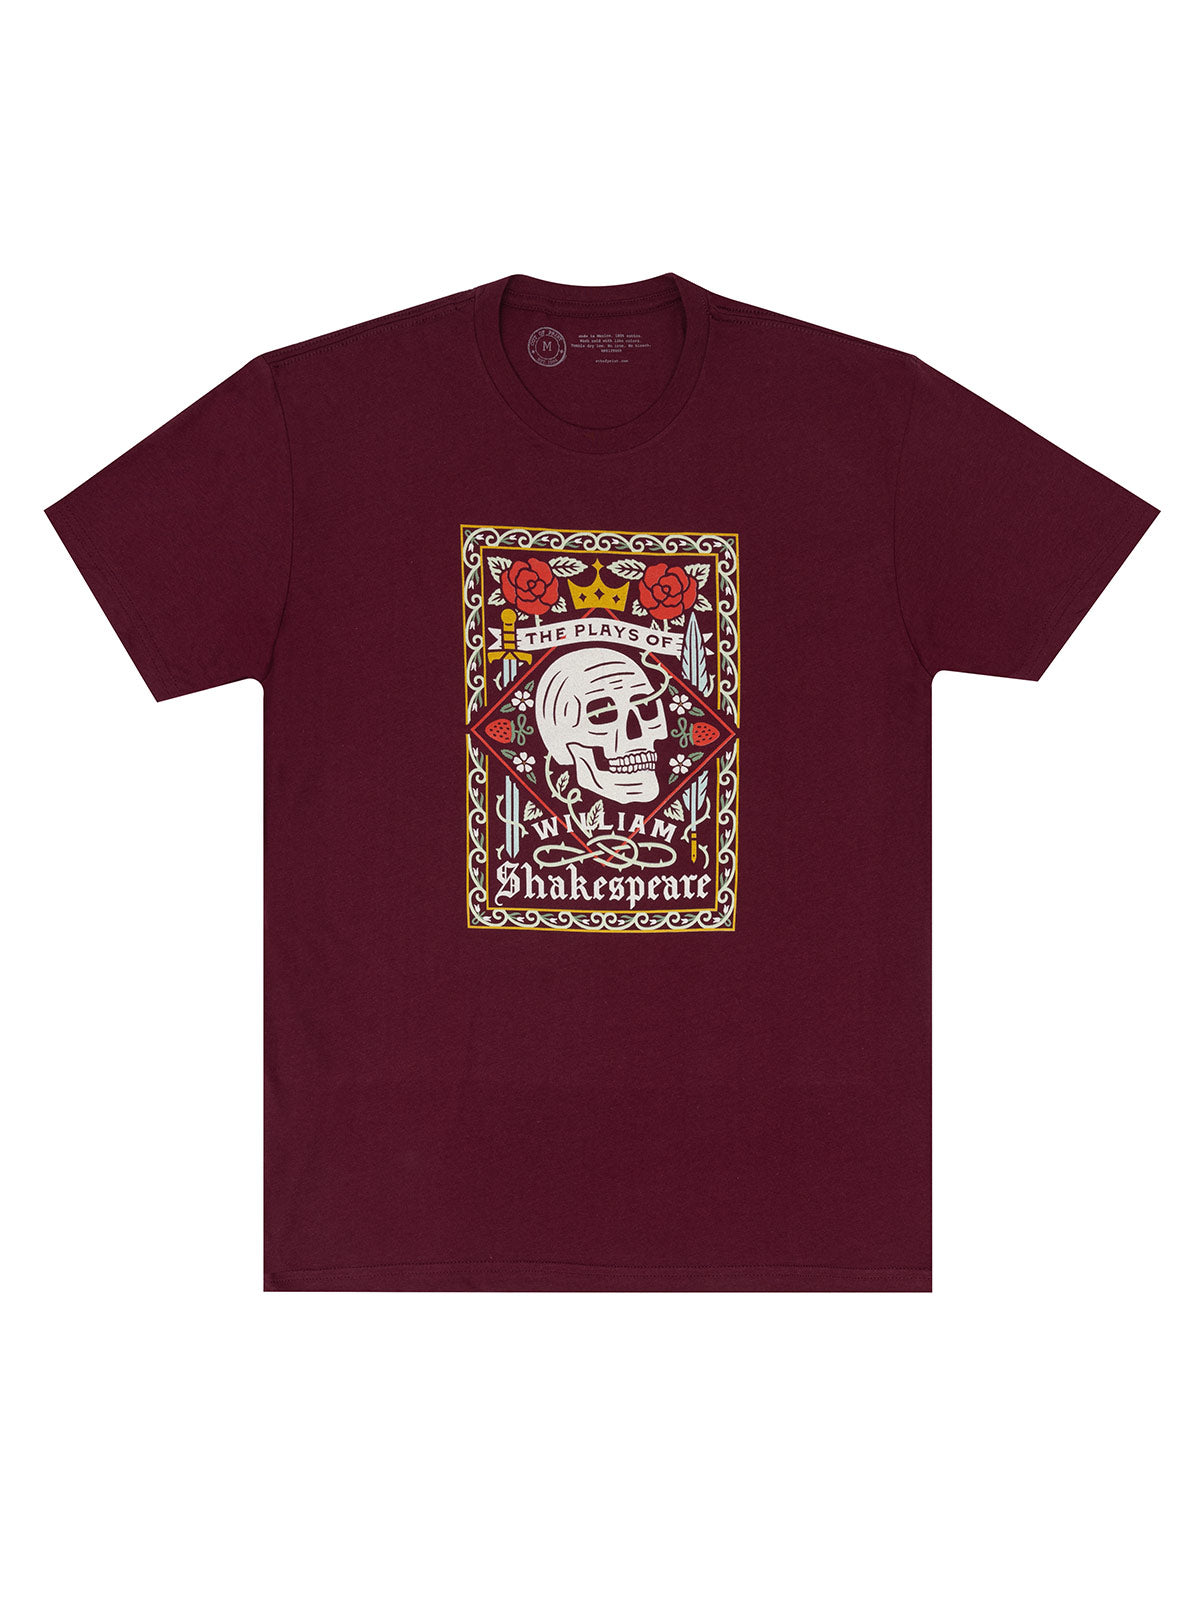 William Shakespeare Book Tees and More Collection